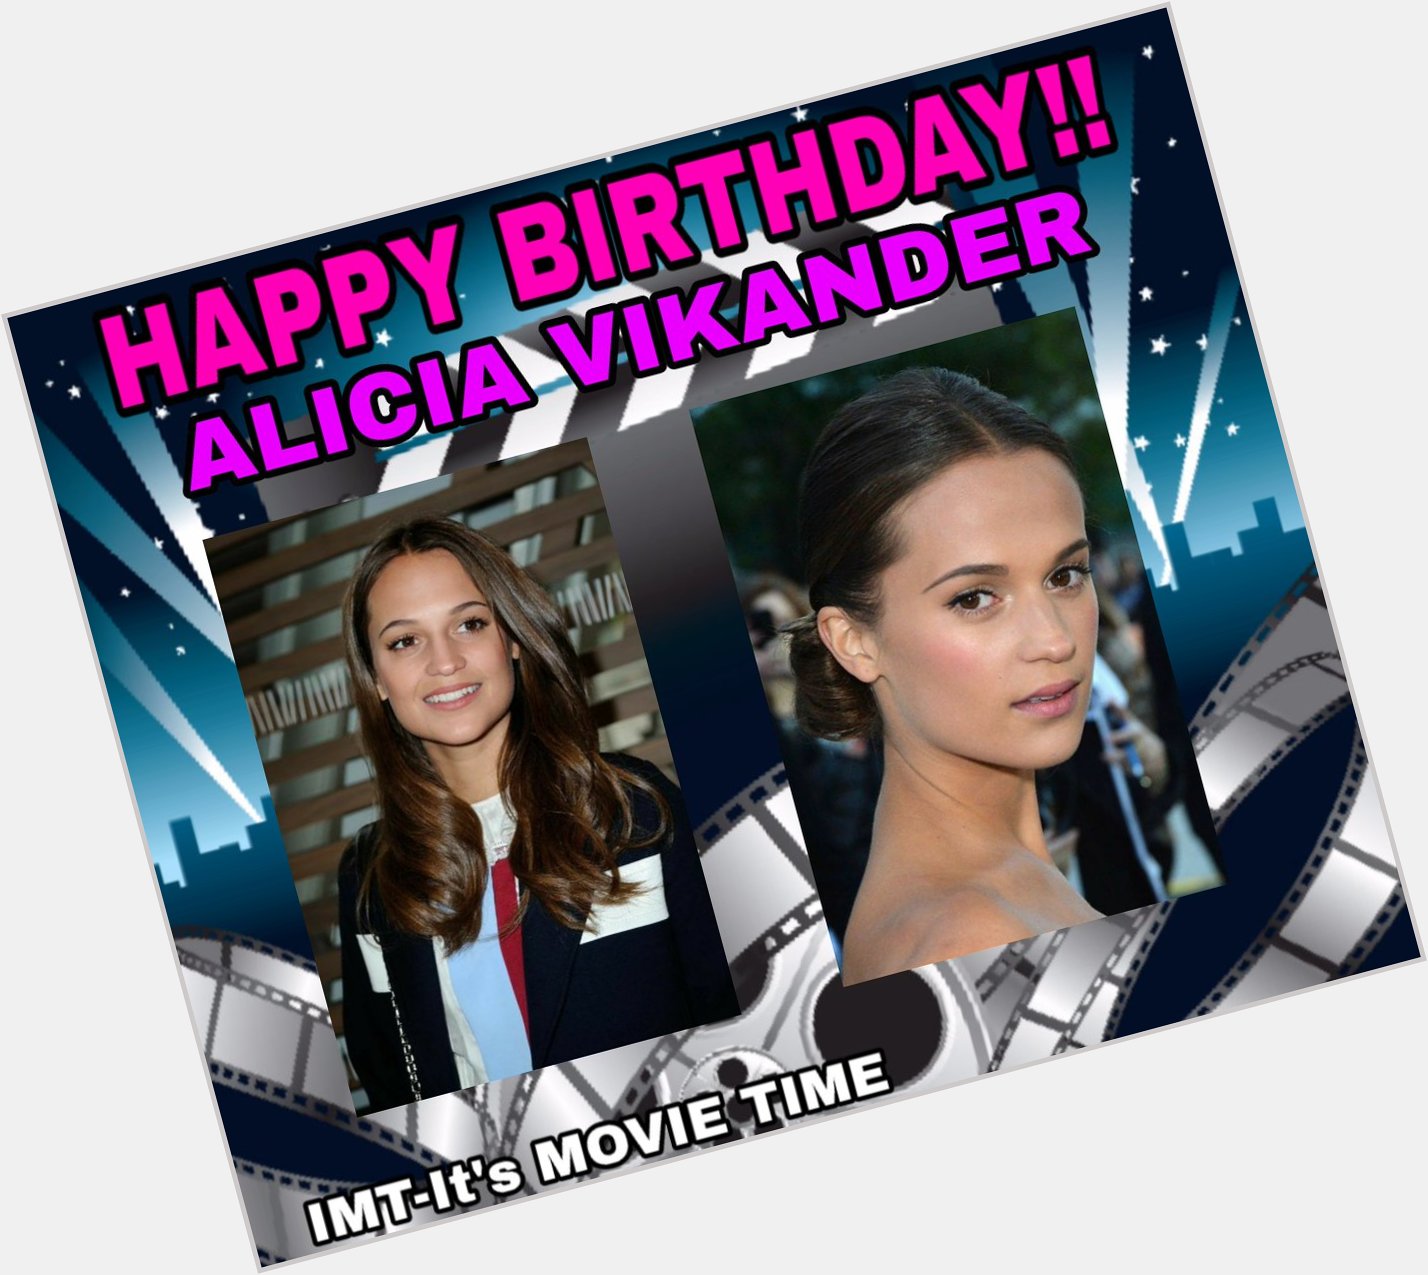 Happy Birthday to the Beautiful Alicia Vikander! The actress is celebrating 32 years. 